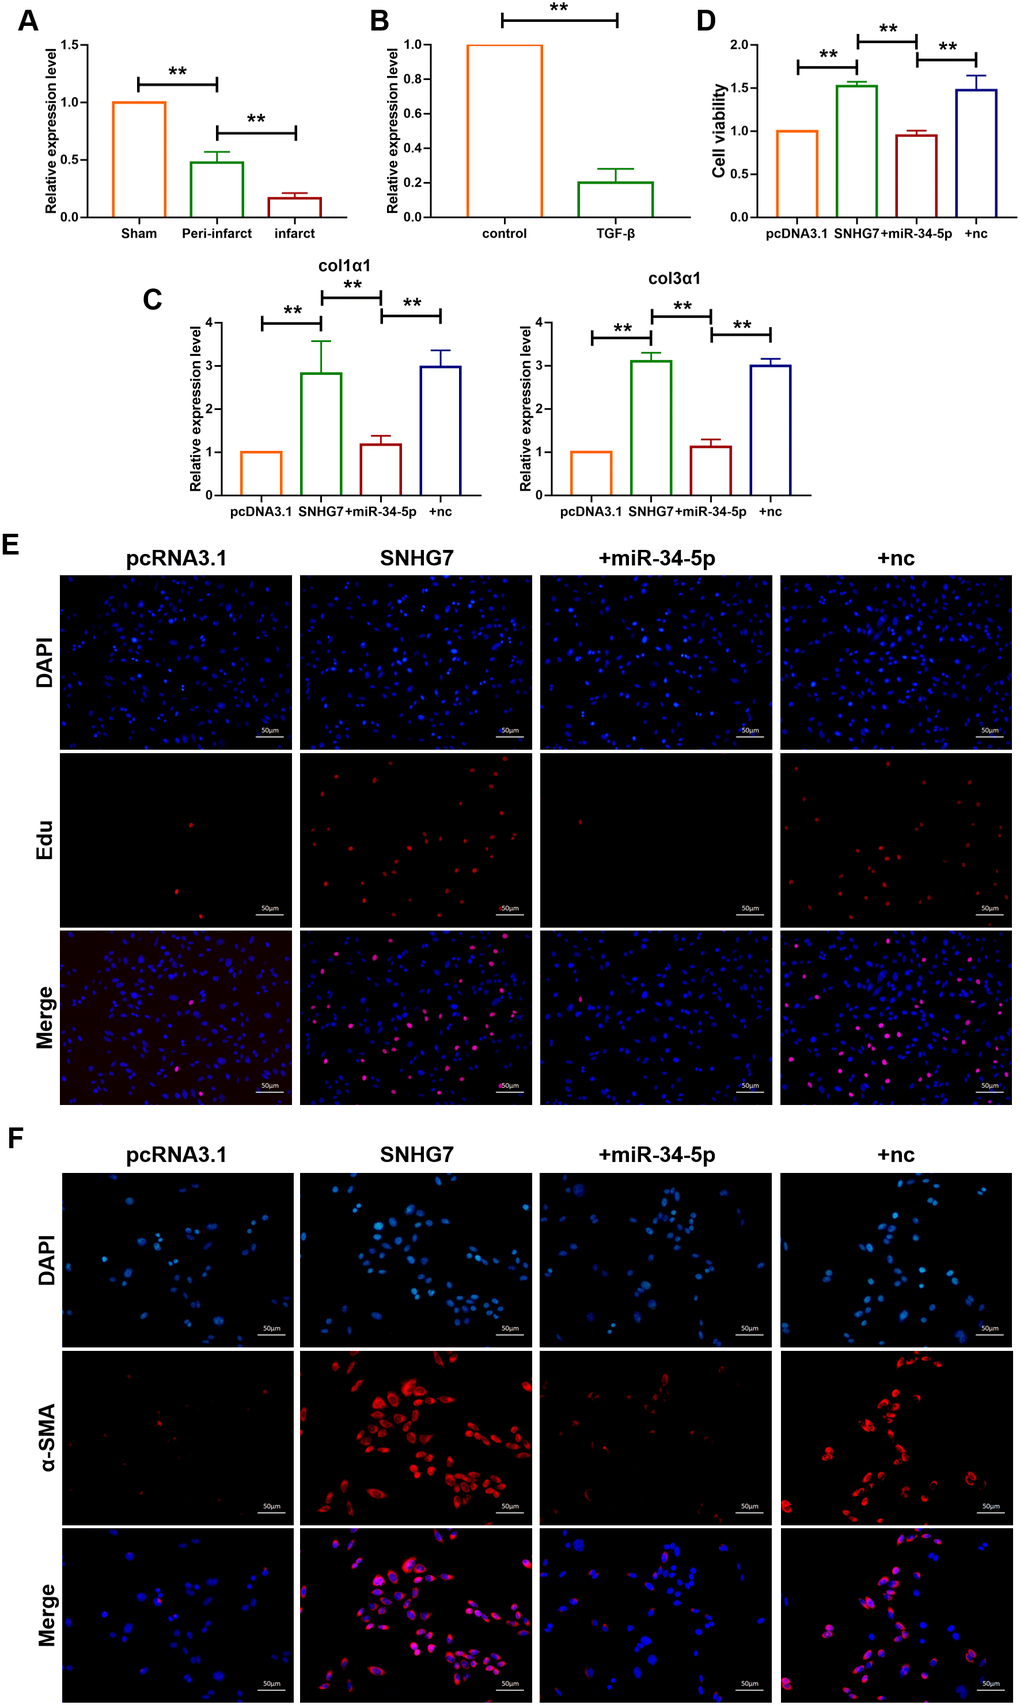 lncRNA SNHG7 promoted cardiac fibrosis by targeting miR-34-5p. (A) qRT-PCR analysis showing downregulation of miR-34-5p in the peri-infarcted and infarcted areas of left ventricle of mice after MI. U6 served as an internal control. Data was presented as mean ± SEM; two-tailed t test was used for the statistical analysis. n=5 mice per group. (B) qRT-PCR analysis showing reduction of miR-34-5p in cardiac fibroblasts after treatment with TGF-β1 (10 ng/mL) for 24h. Data was presented as mean ± SEM; two-tailed t test was used for the statistical analysis. n=5 independent cell cultures. (C) mRNA expression of collagen 1α1 and collagen 3α1 were measured by qRT-PCR. Forced expression of SNHG7 (1 μg/mL) in cardiac fibroblasts increased mRNA expression levels of collagen 1α1 and collagen 3α1, which were reversed by miR-34-5p overexpression; GAPDH mRNA served as an internal control. Data was presented as mean ± SEM; one-way ANOVA was used for the statistical analysis. n=6 mice per group. (D) MTT assay for the assessment of cell viability. Transfection of SNHG7 with or without miR-34-5p in normal cardiac fibroblasts. Data was presented as mean ± SEM; two-tailed t test was used for the statistical analysis. n=5 independent cell cultures. (E) EdU staining for the assessment of cell proliferation in cardiac fibroblasts overexpressing SNHG7 in the presence or absence of miR-34-5p mimics. Scale bars represented 50 μm. (F) Representative images of immunofluorescence staining showing that forced expression of SNHG7-induced fibroblast-myofibroblast transition. Scale bars represent 50 μm. **P